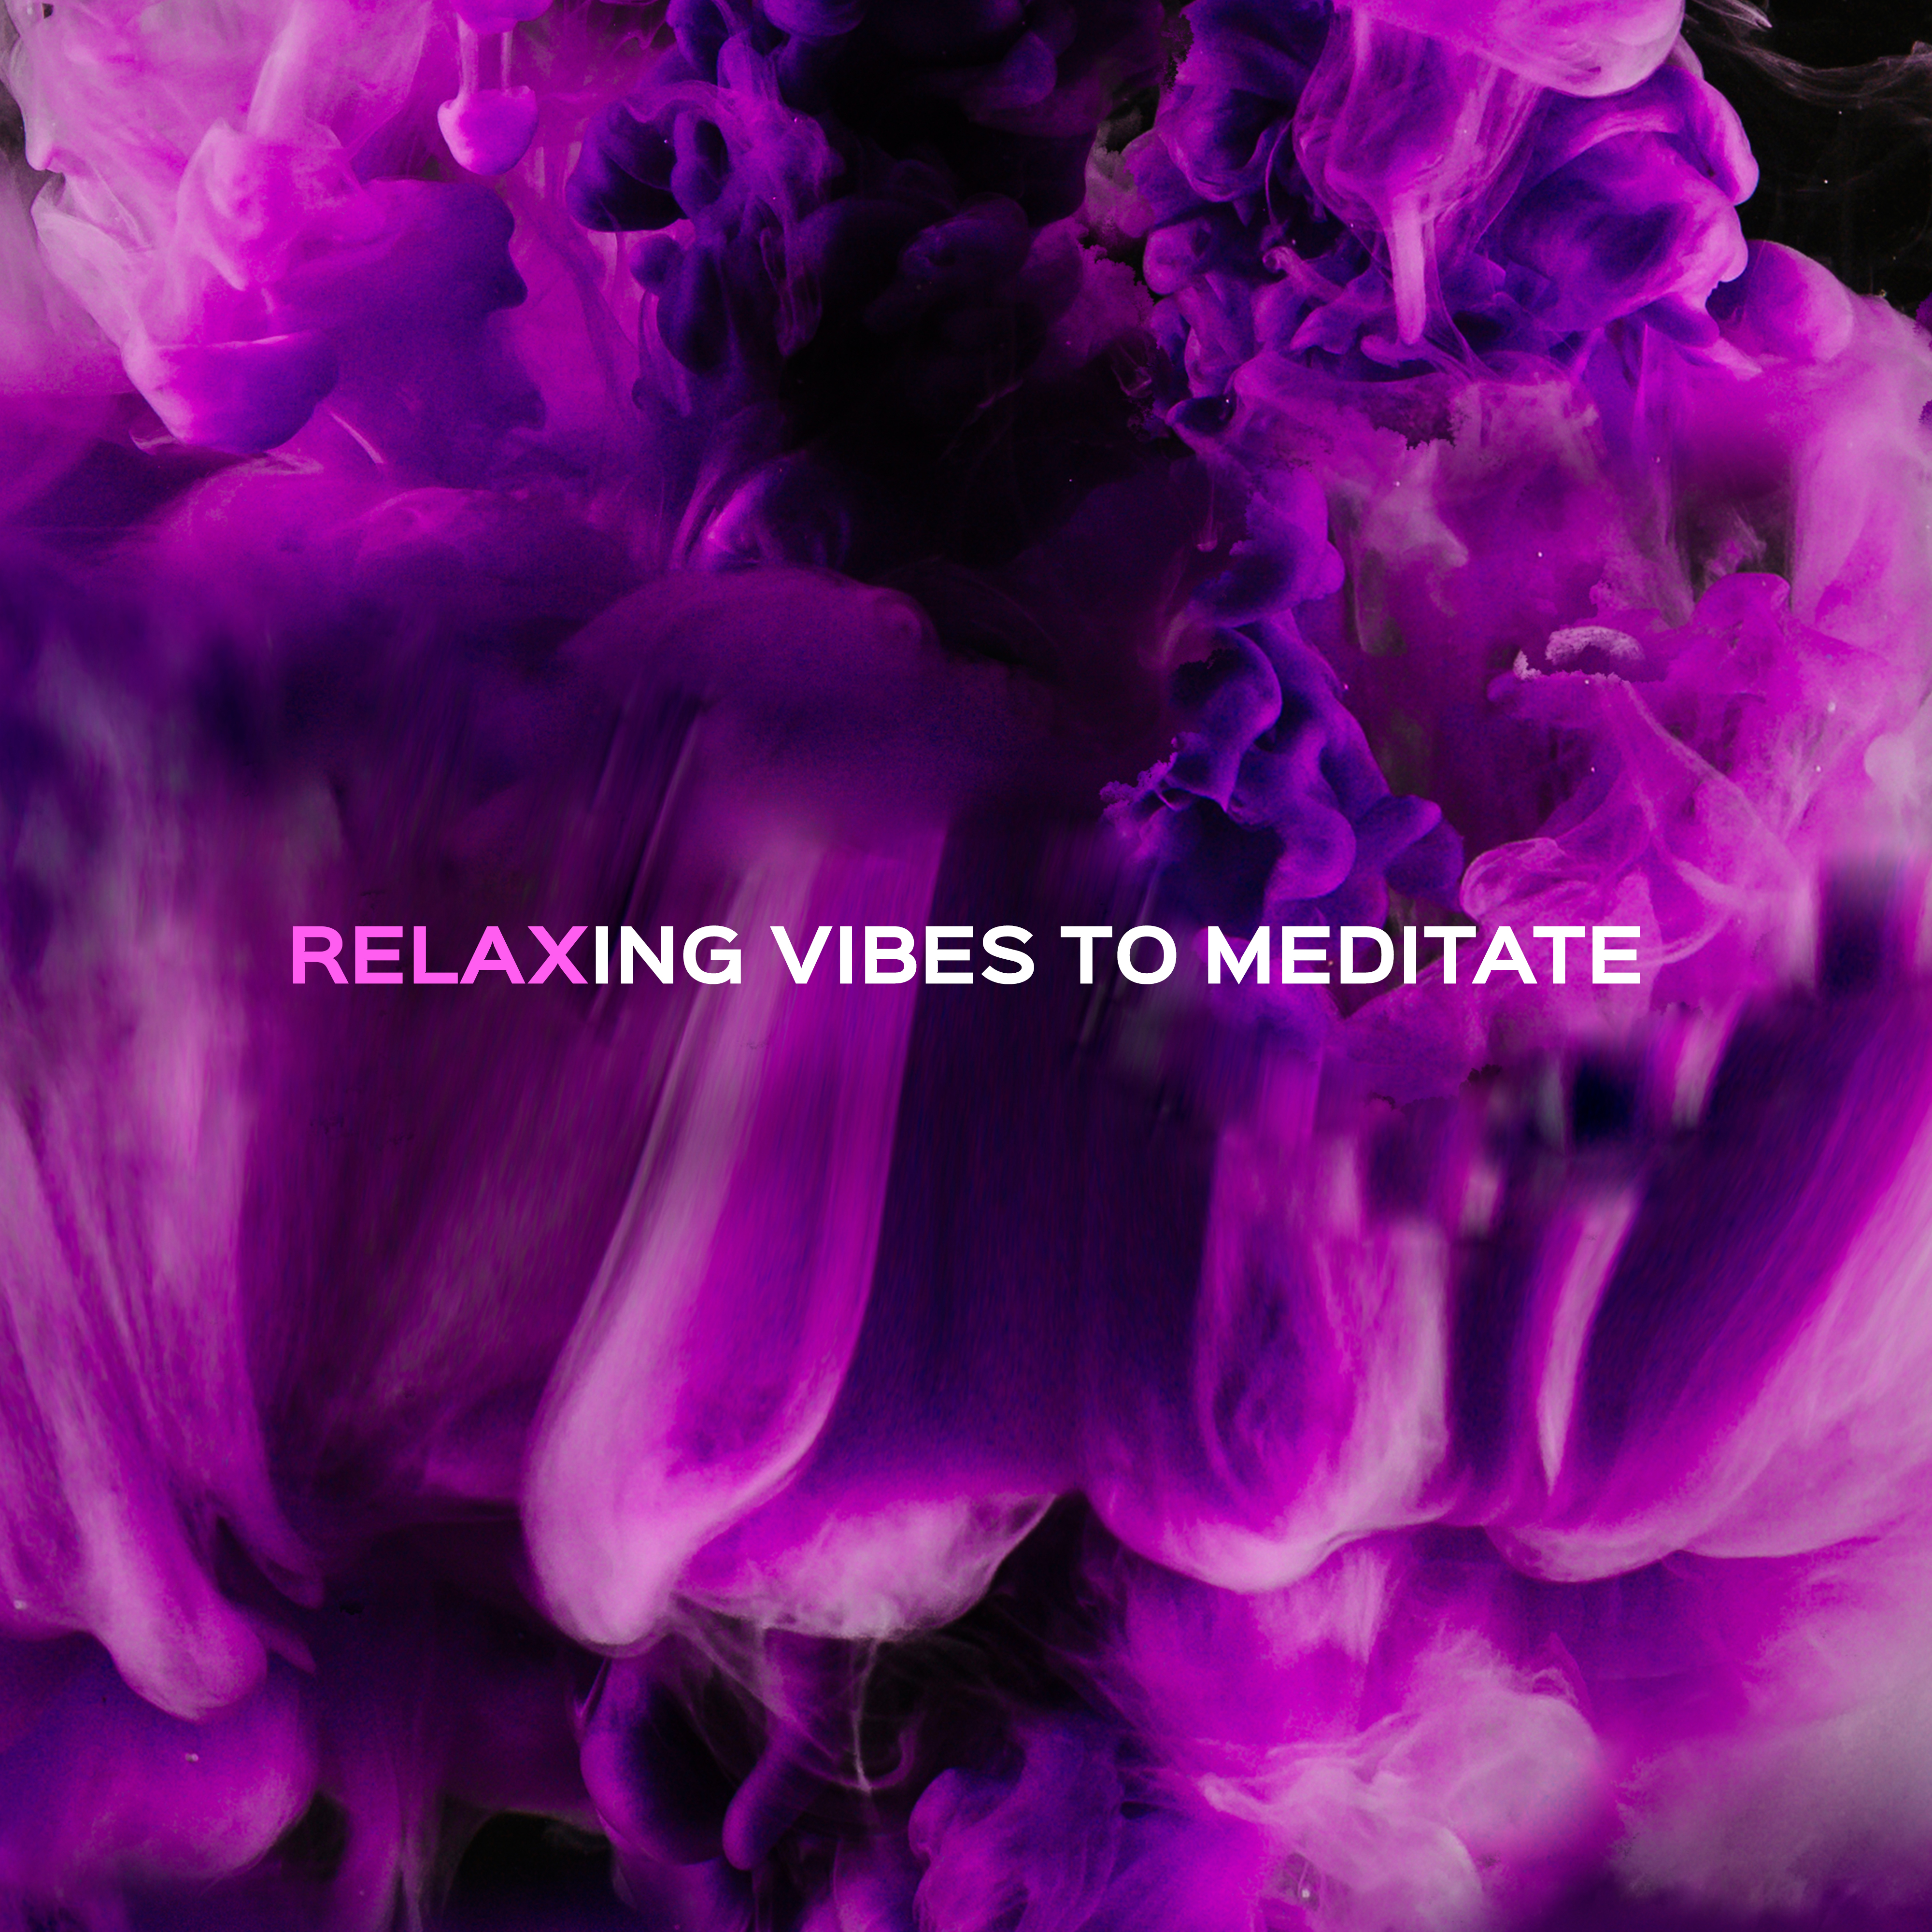 Relaxing Vibes to Meditate